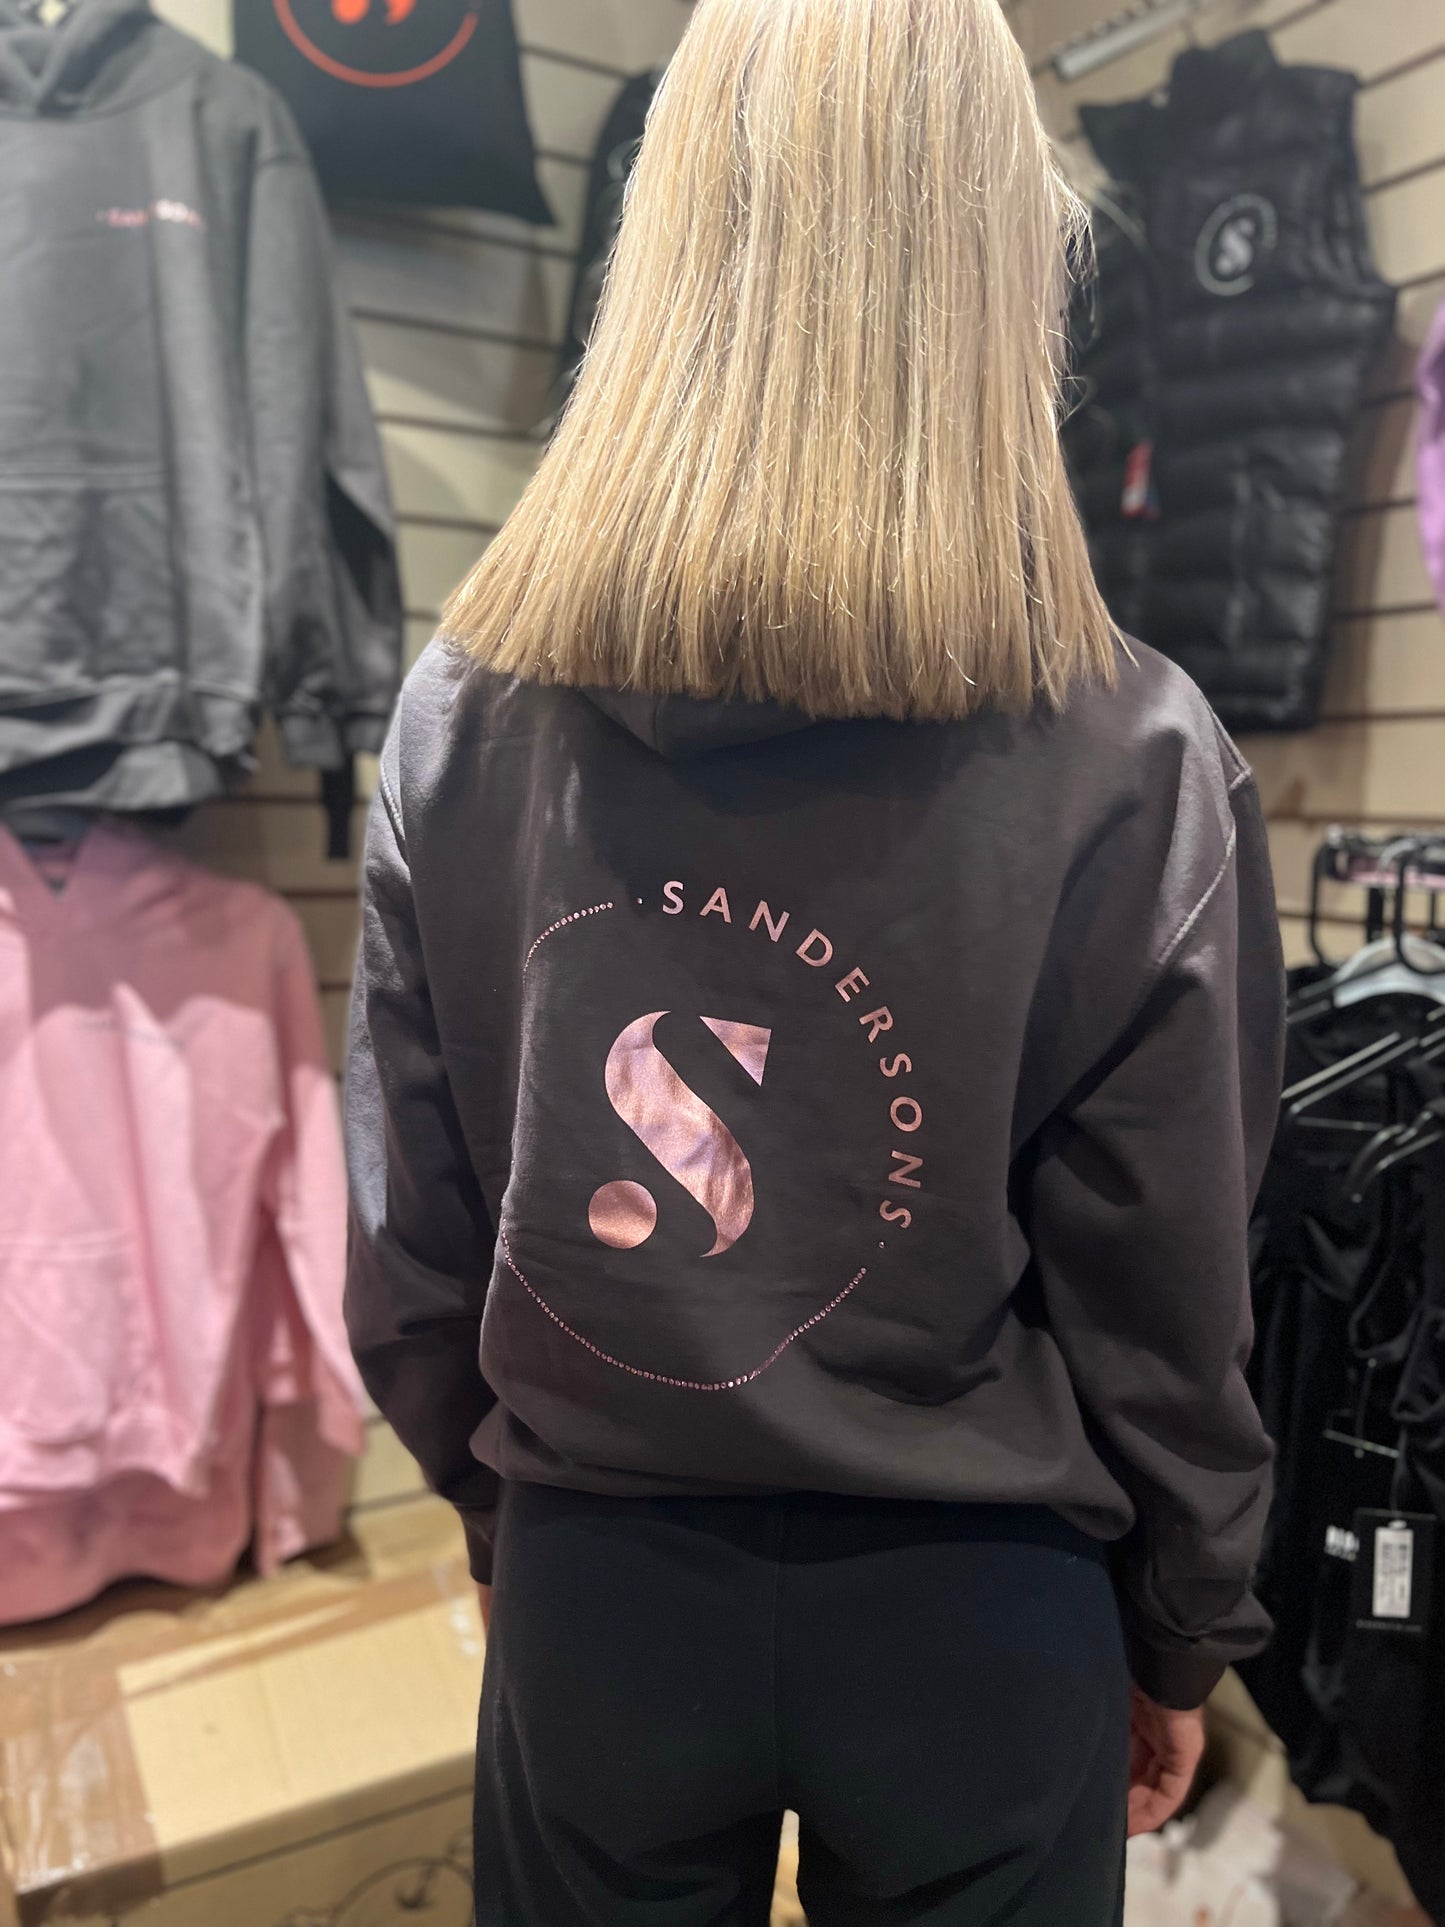 KIDS & ADULT SIZES STORM GREY SANDERSONS PULLOVER HOODIE BY AXZNT WITH METALLIC ROSE GOLD BADGE PRINT AND LARGE METALLIC ROSE GOLD PRINT & STONES